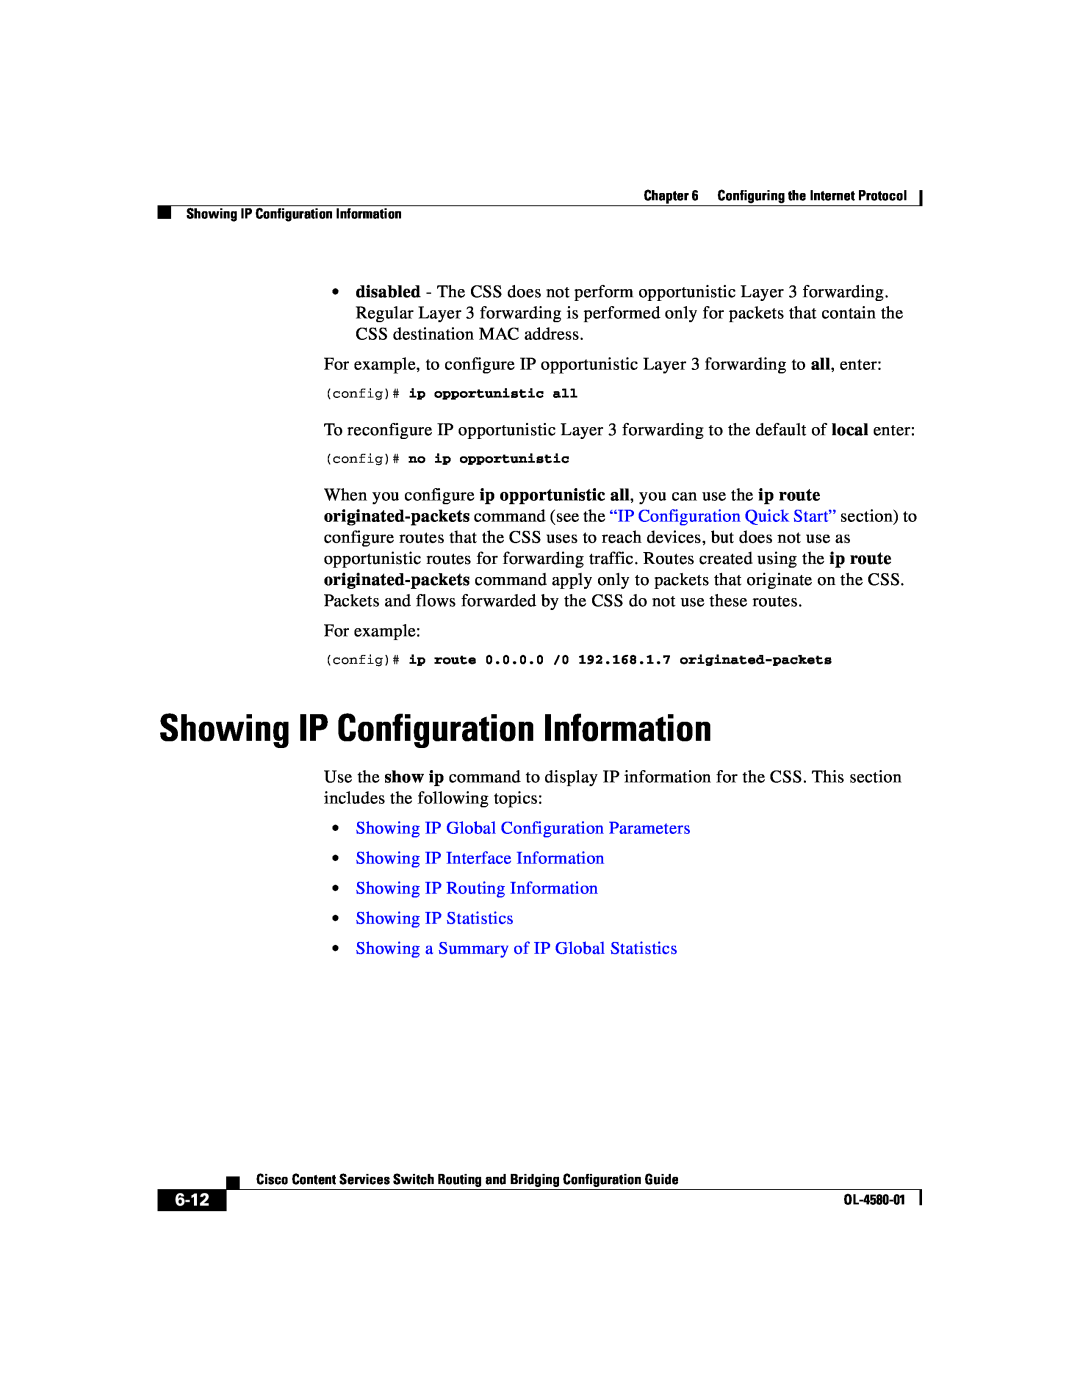 Cisco Systems OL-4580-01 manual Showing IP Configuration Information, Showing IP Global Configuration Parameters, 6-12 